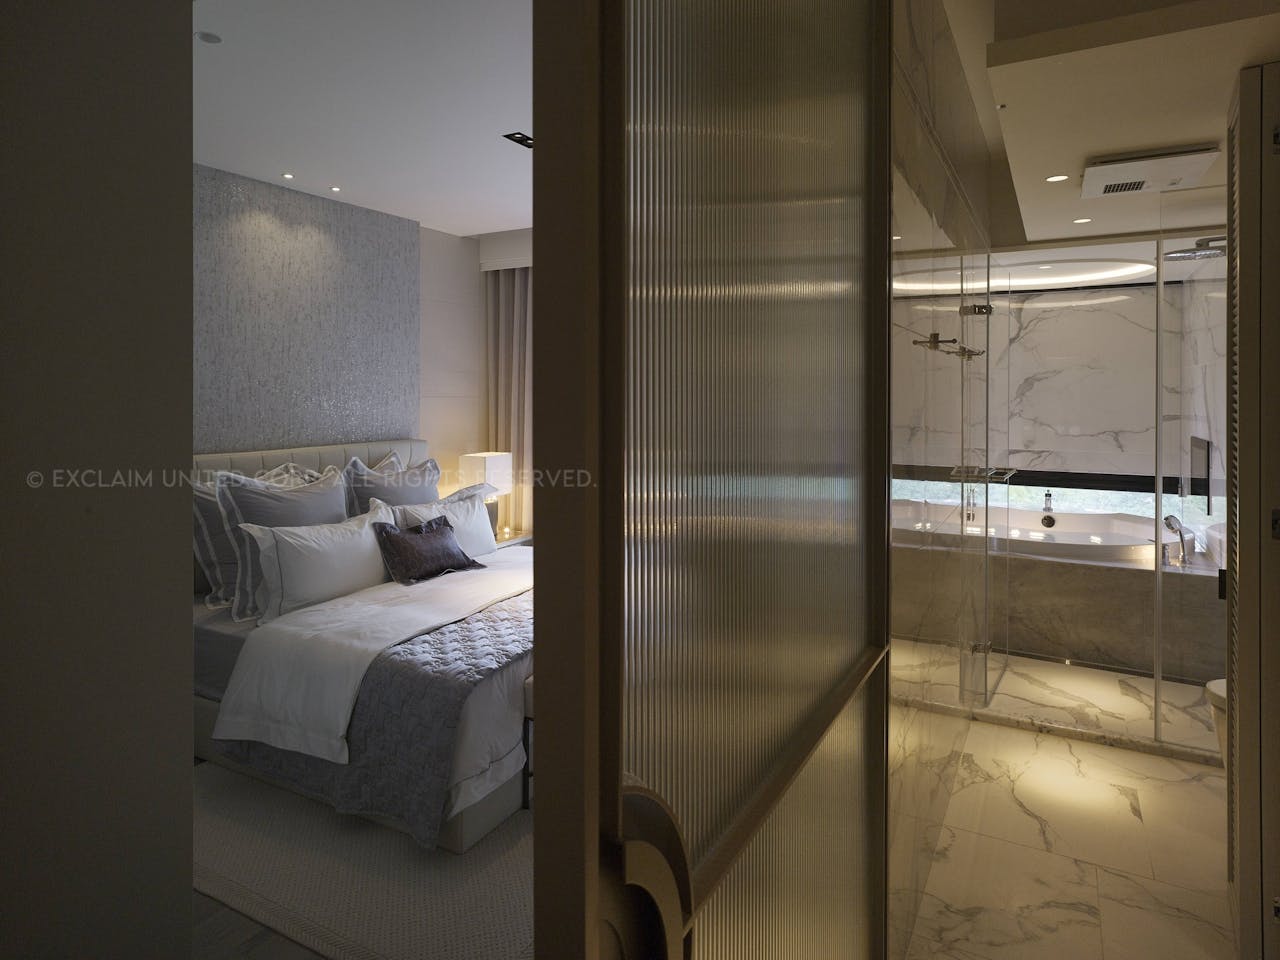 In the master bedroom and bath grays and blues create a serene sleeping environment.